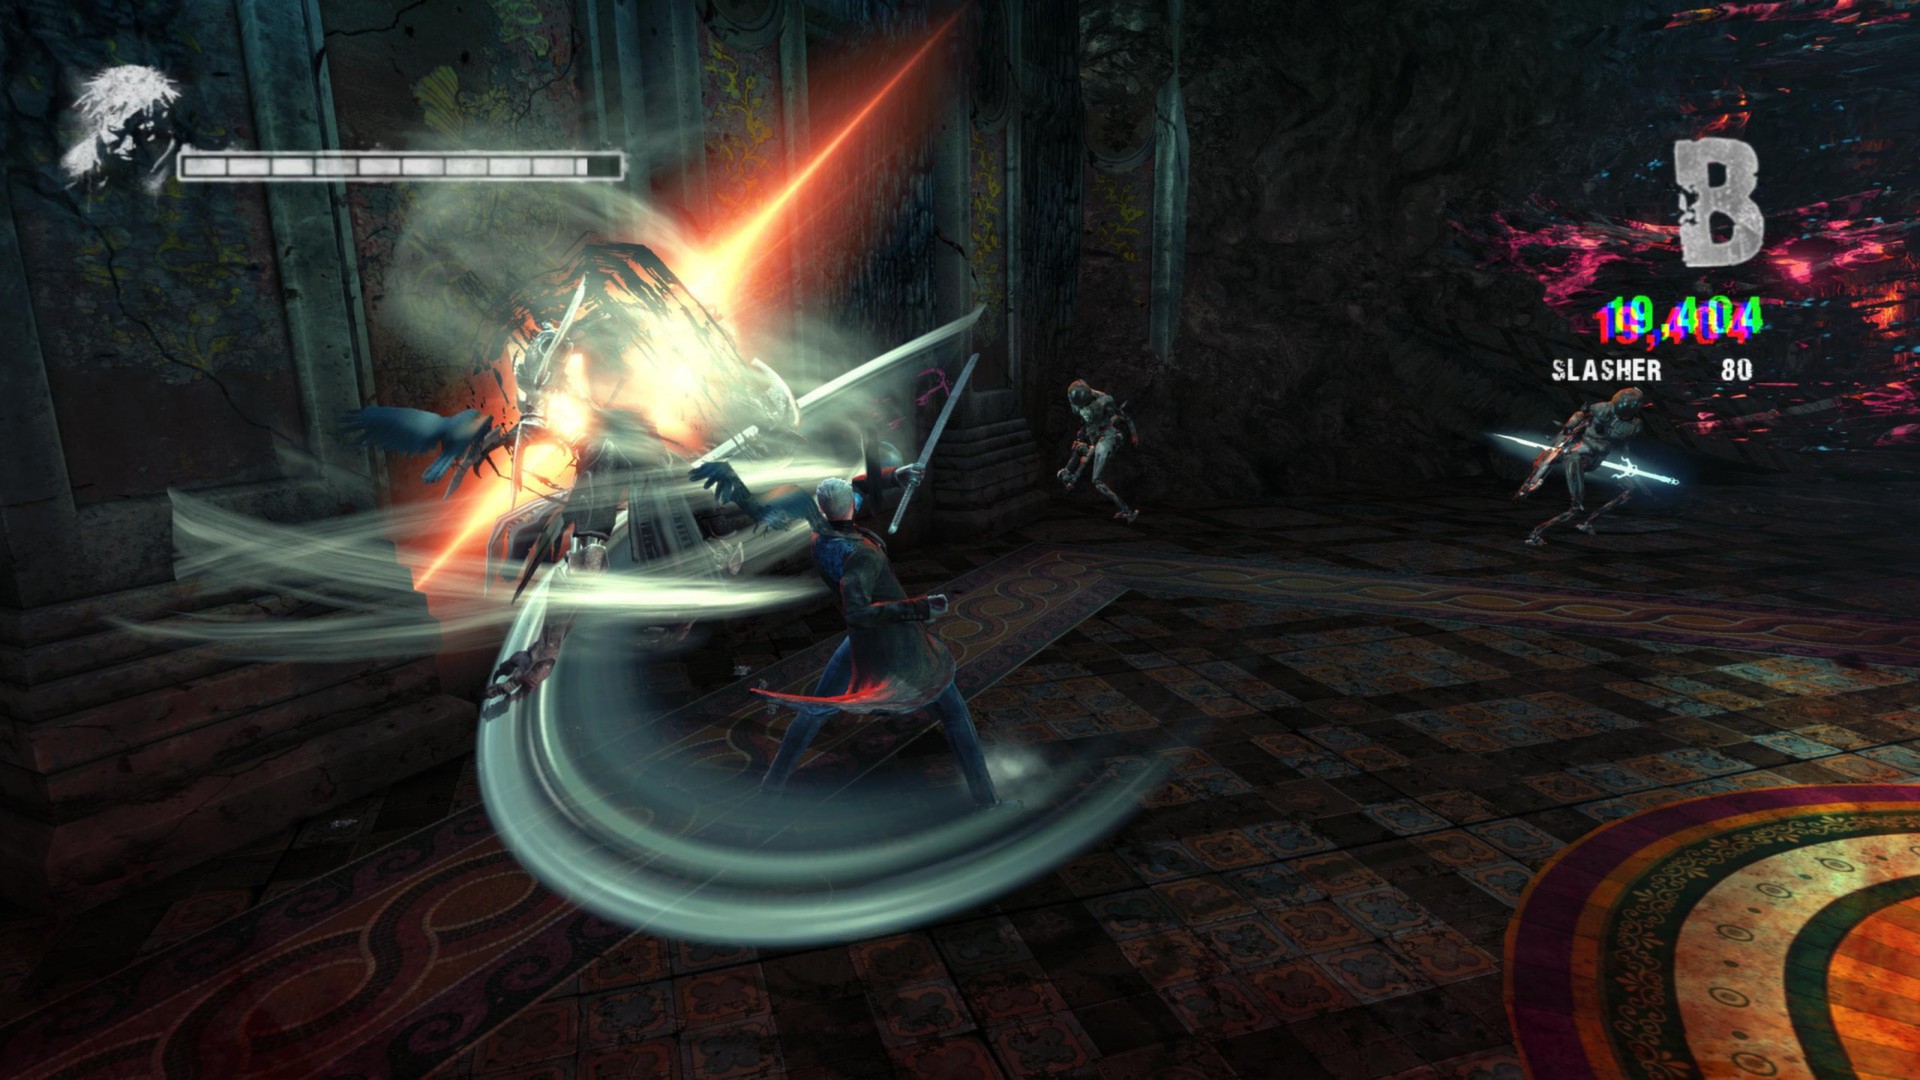 REVIEW – DmC: DEVIL MAY CRY, VERGIL'S DOWNFALL DLC.